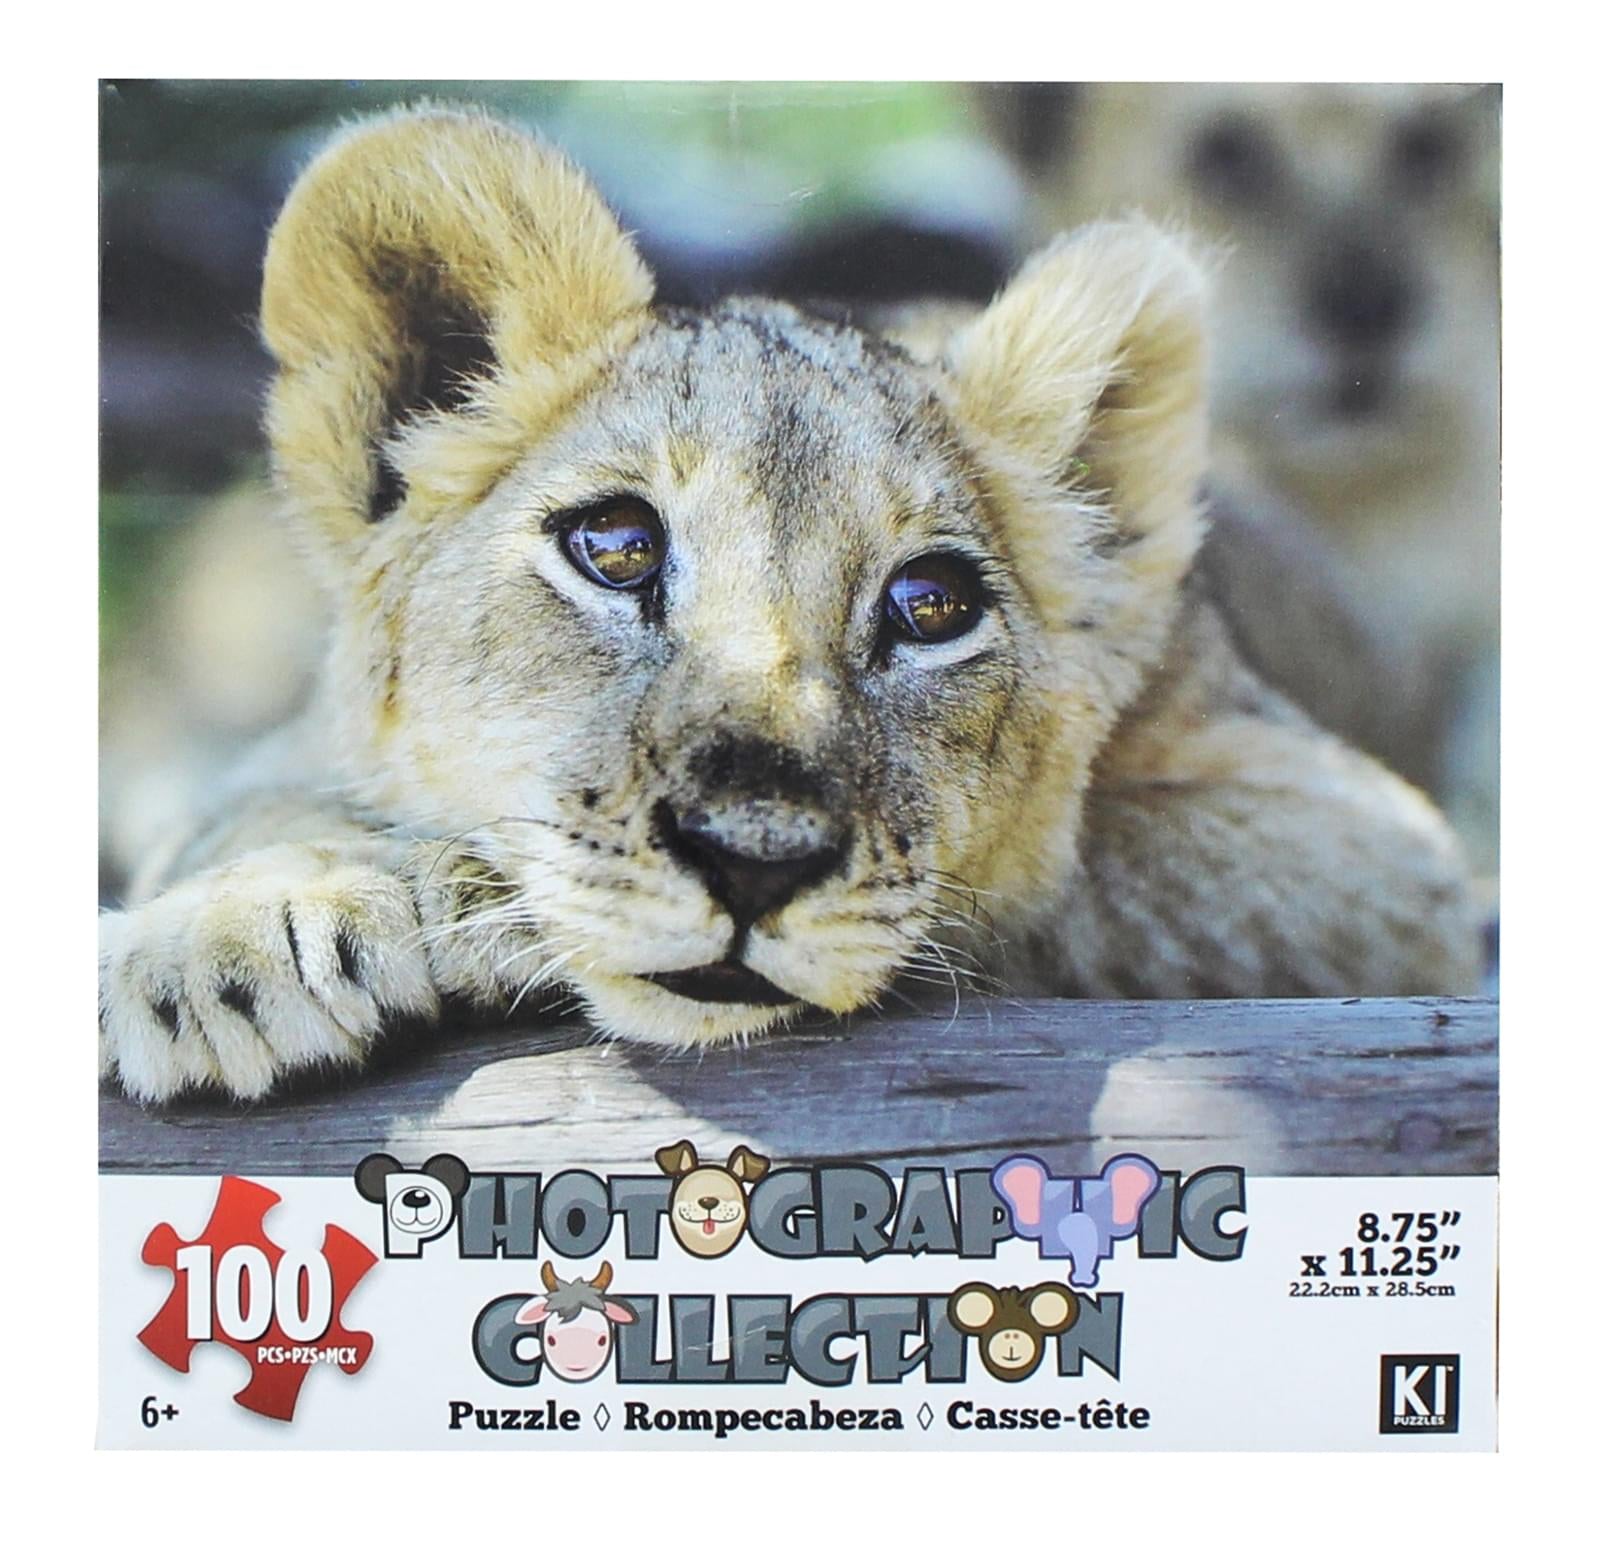 Lion 100 Piece Photographic Collection Jigsaw Puzzle